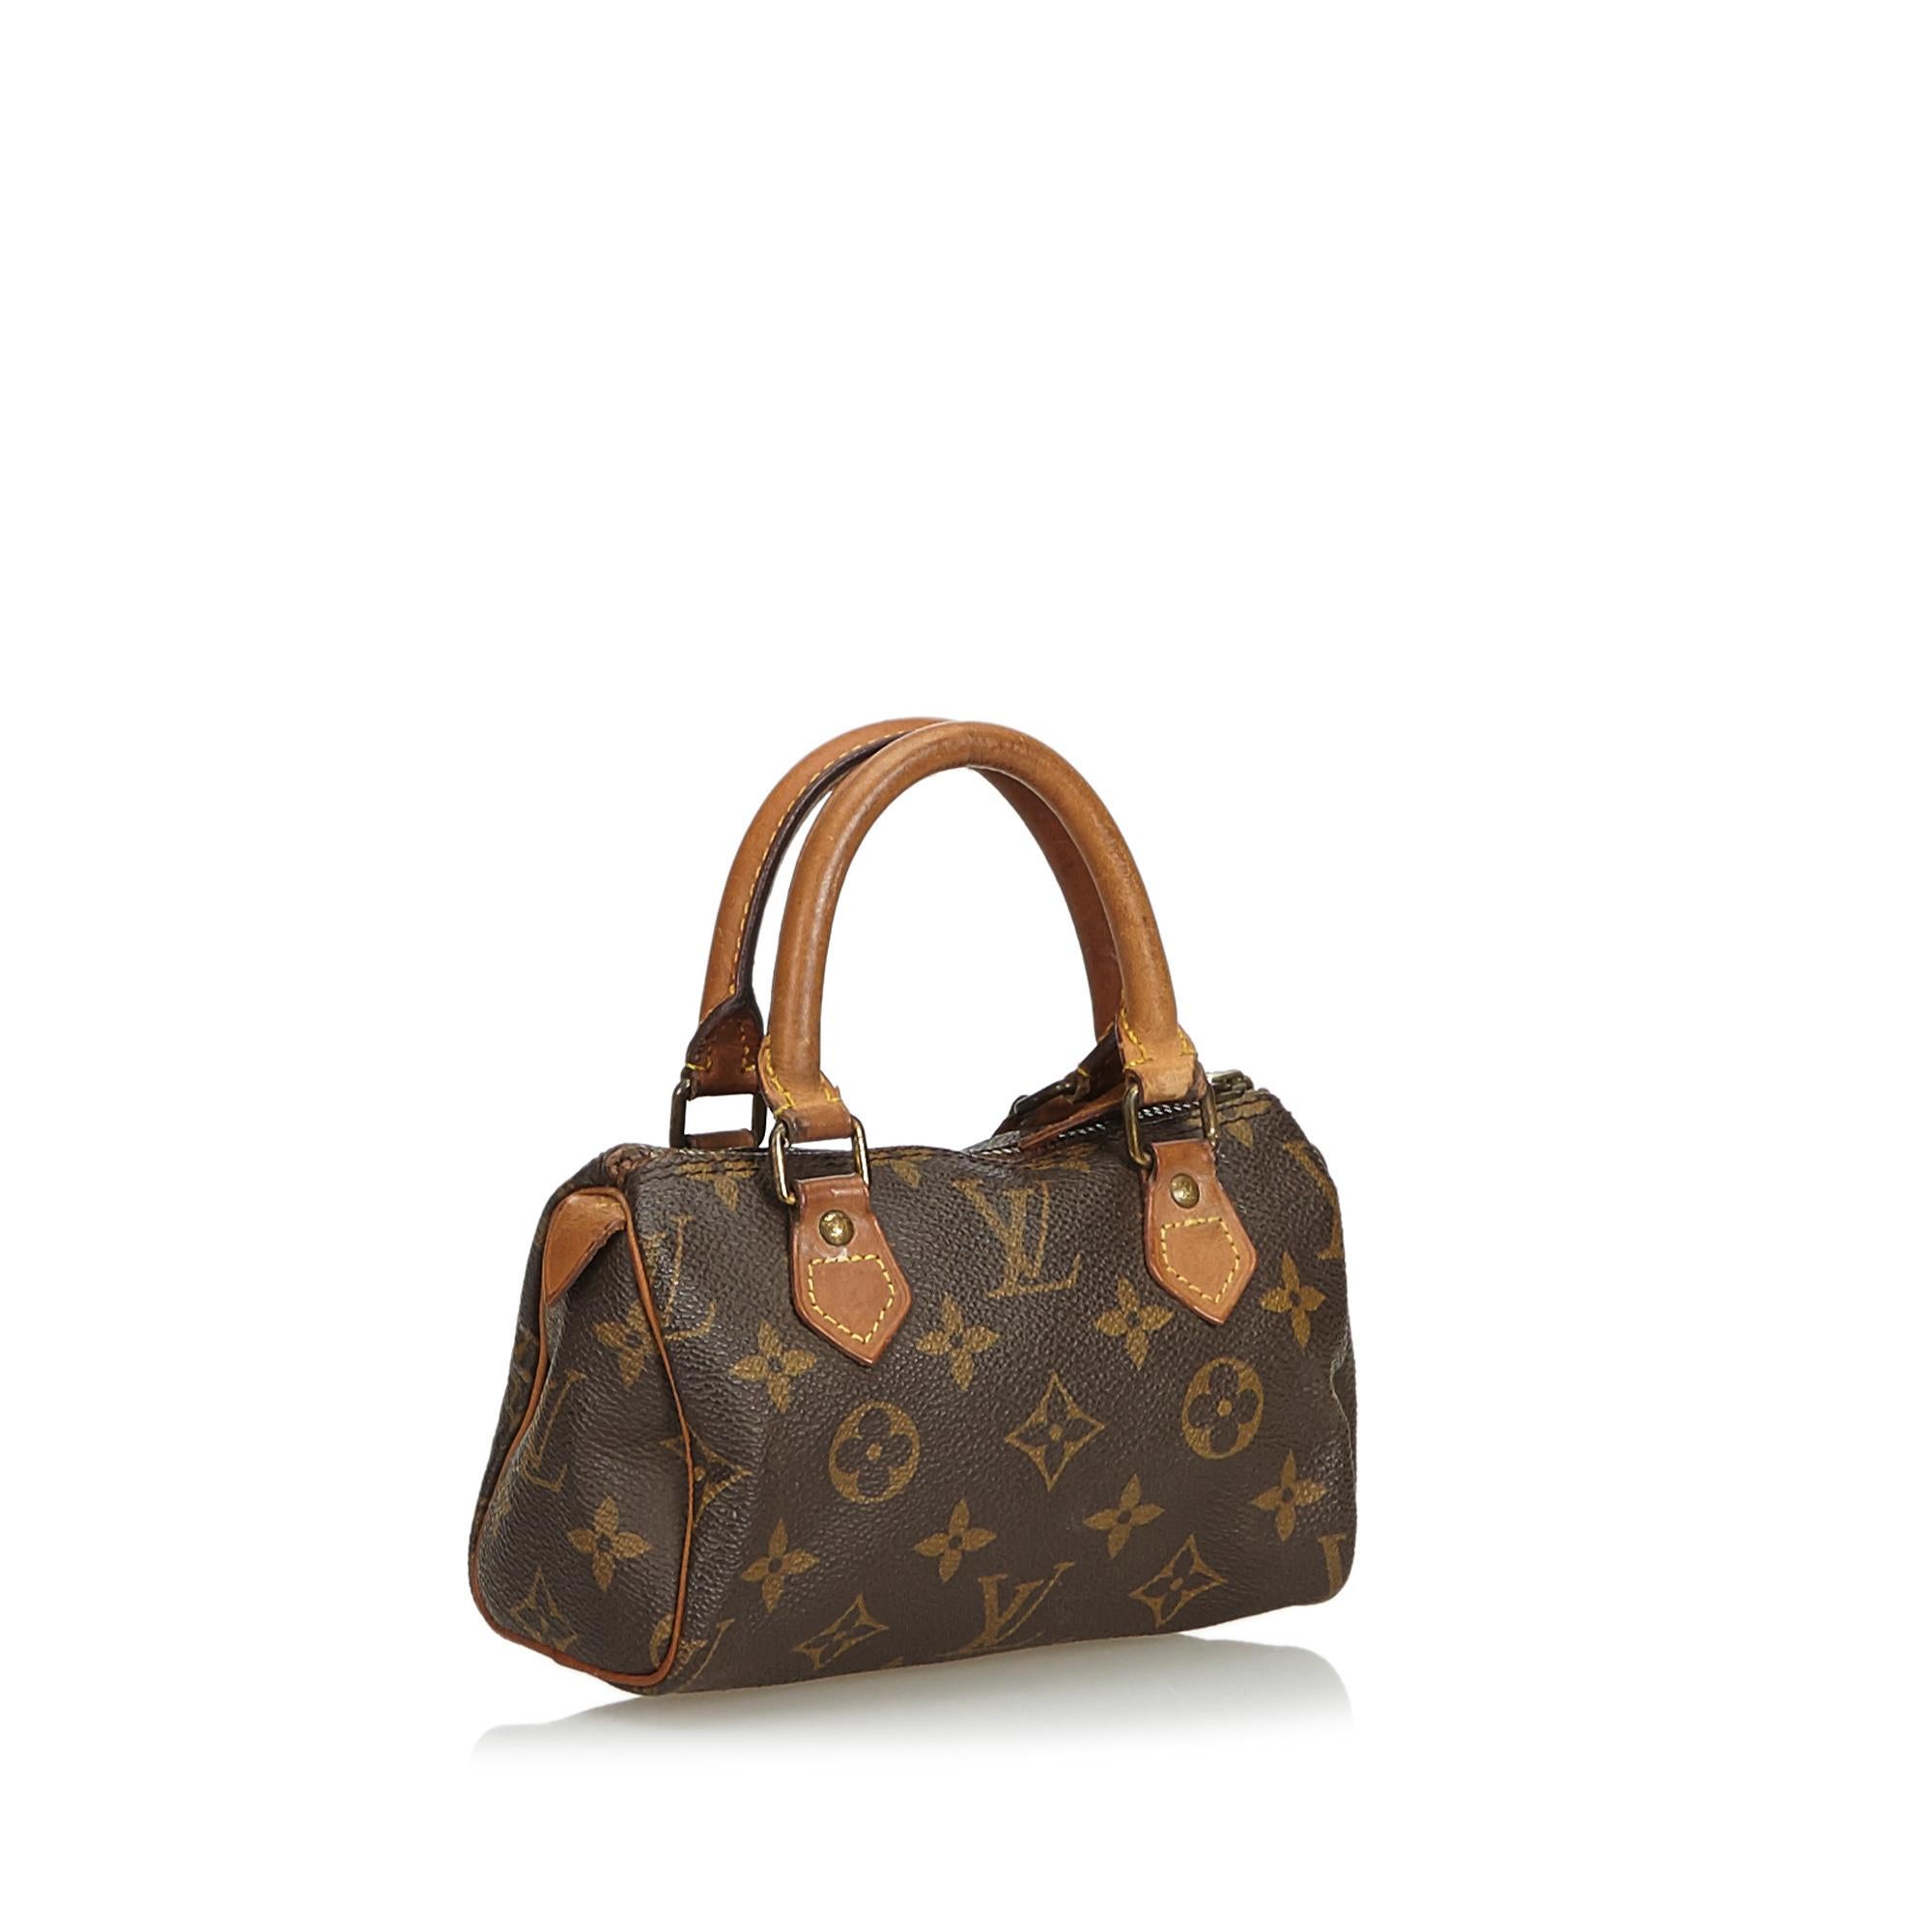 The Mini Speedy features a monogram canvas body, rolled leather handles, and a top zip closure. It carries as B condition rating.

Inclusions: 
This item does not come with inclusions.


Louis Vuitton pieces do not come with an authenticity